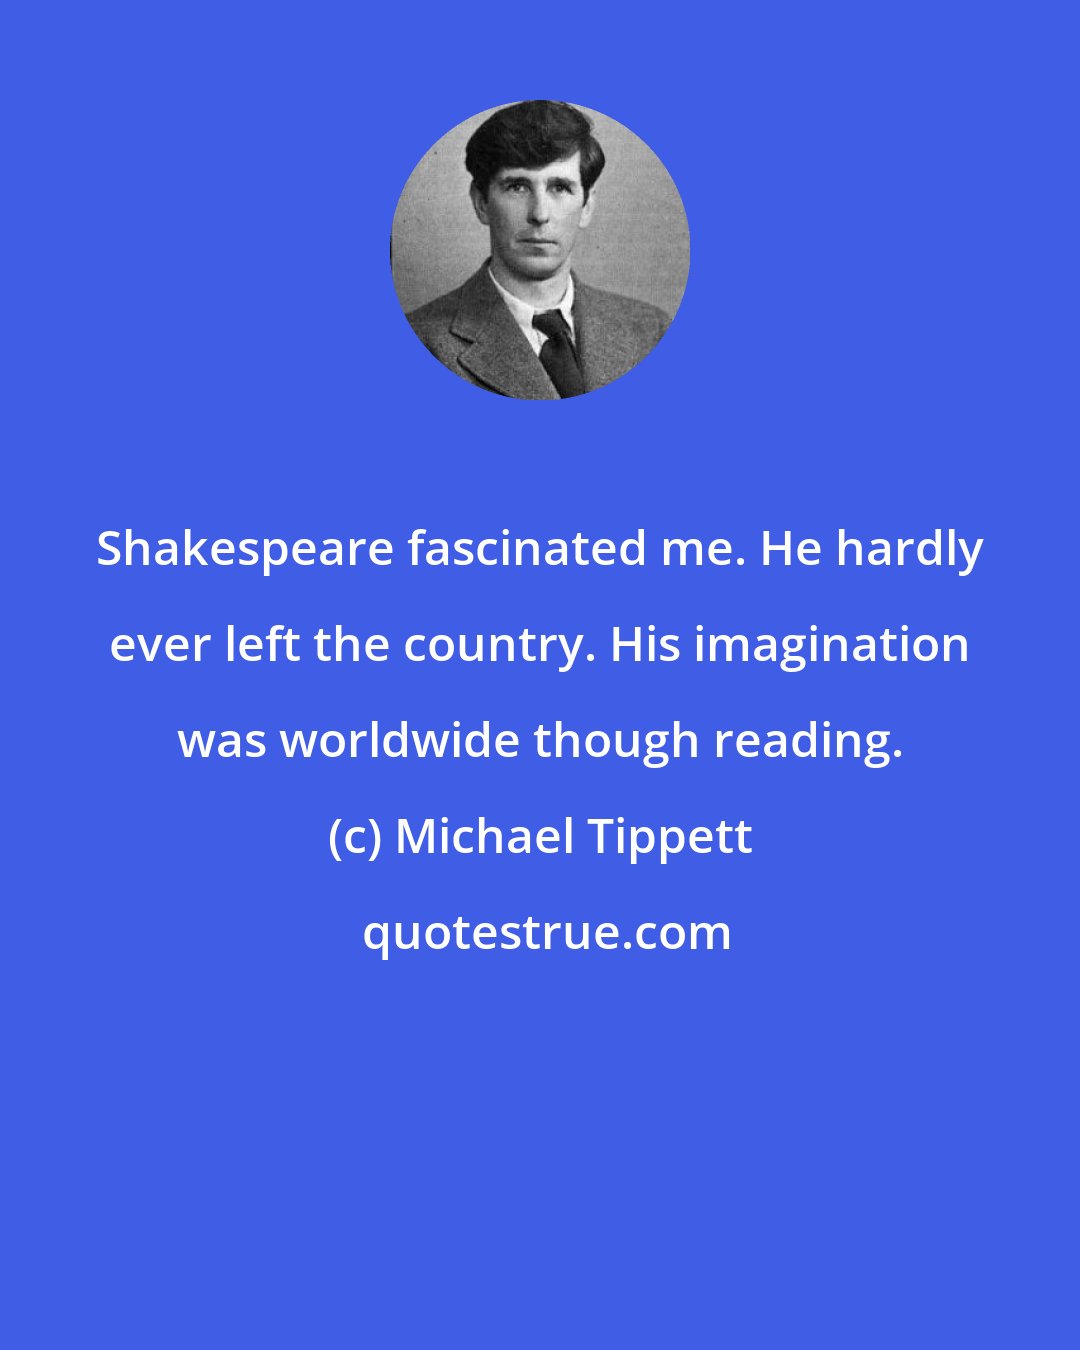 Michael Tippett: Shakespeare fascinated me. He hardly ever left the country. His imagination was worldwide though reading.